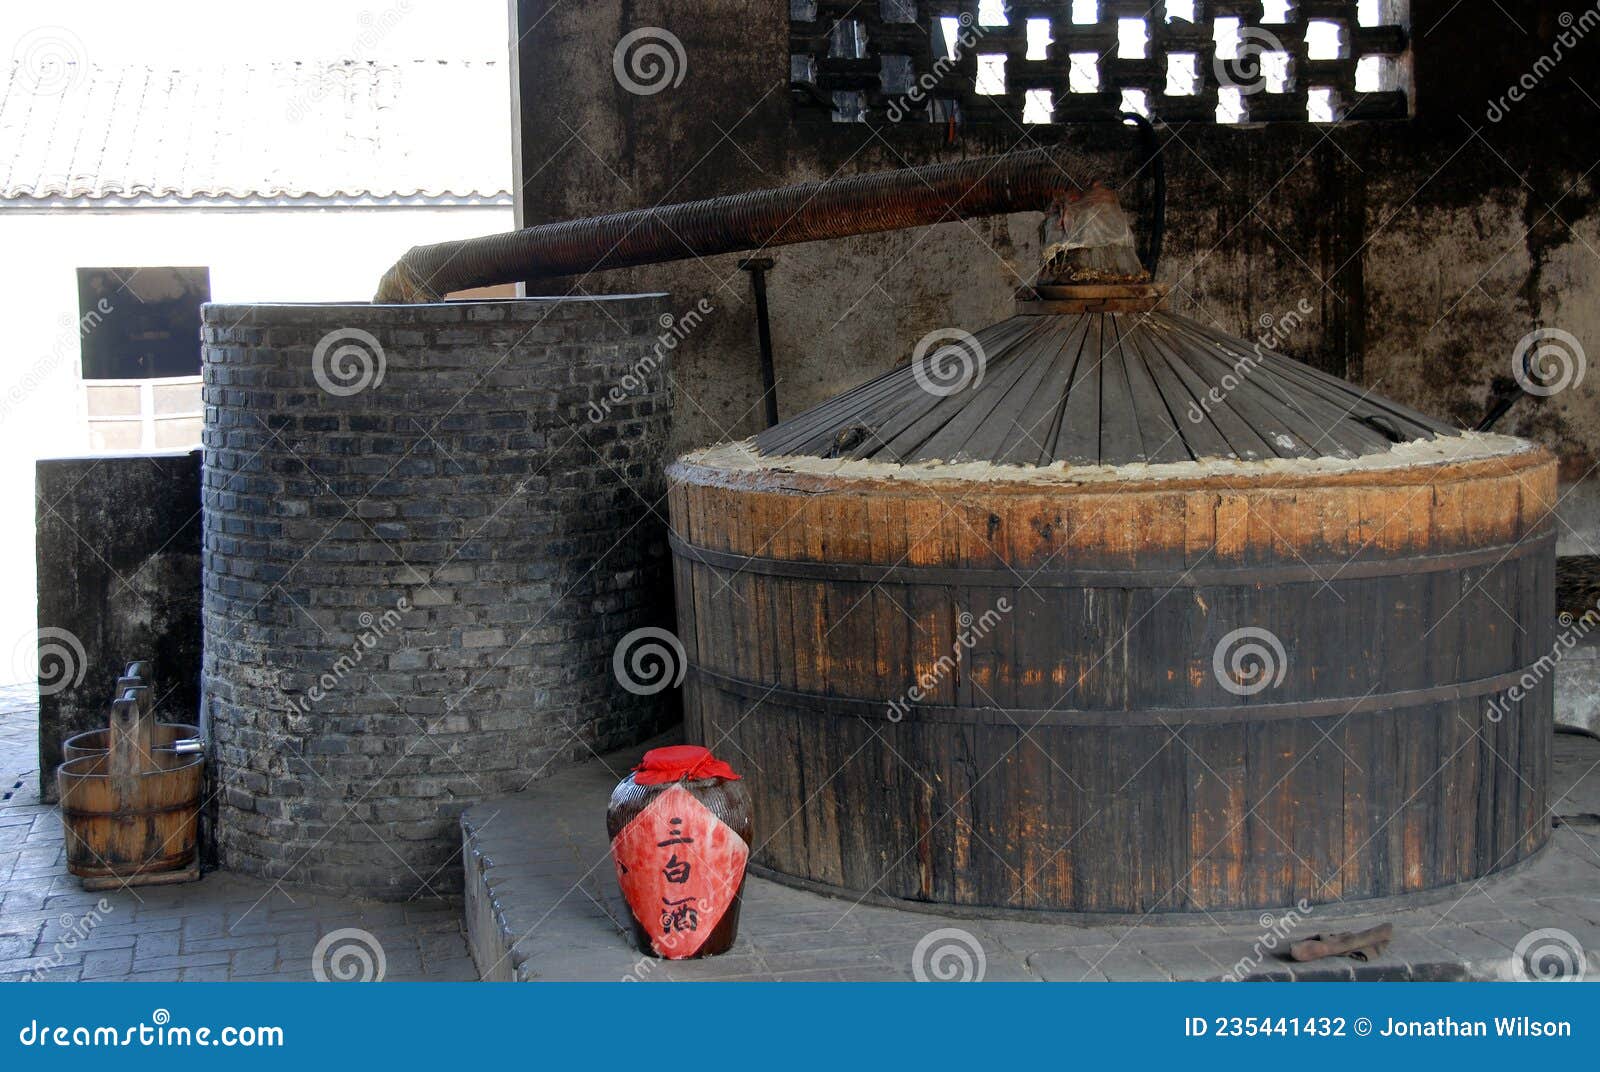 a still for producing bai jiu, a chinese alcoholic drink, in wuzhen, china.